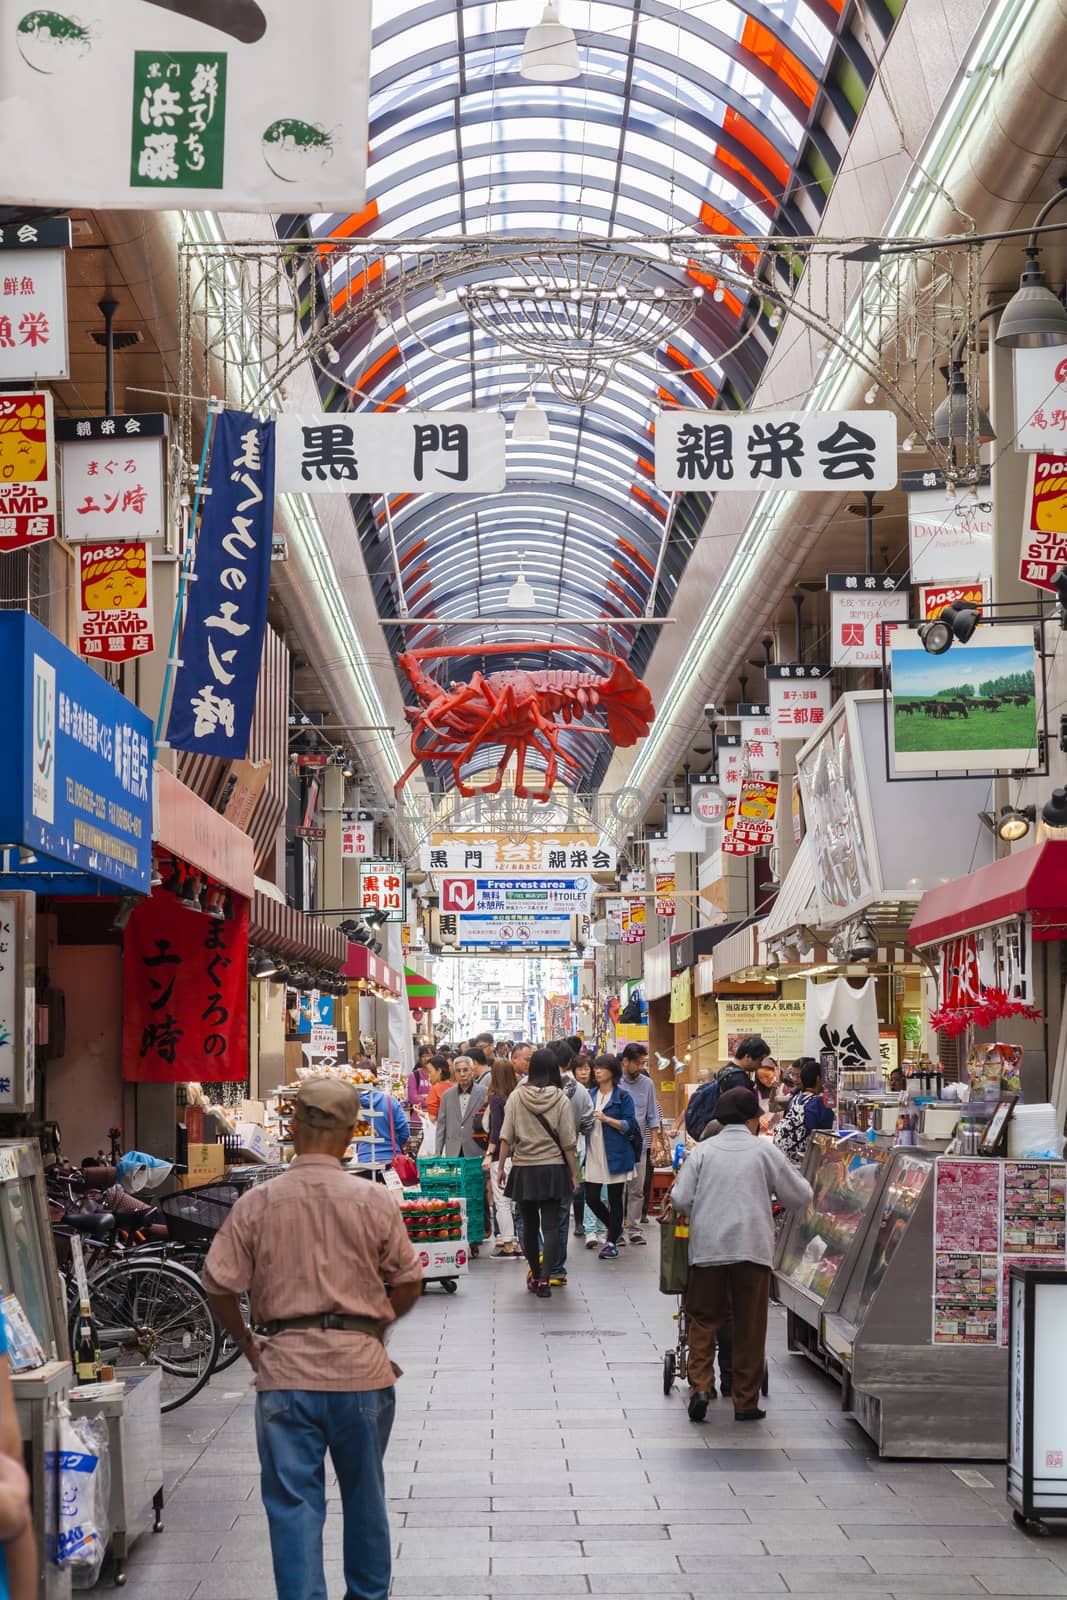 People shopping in the Kuromon Market in Osaka, Japan by ymgerman